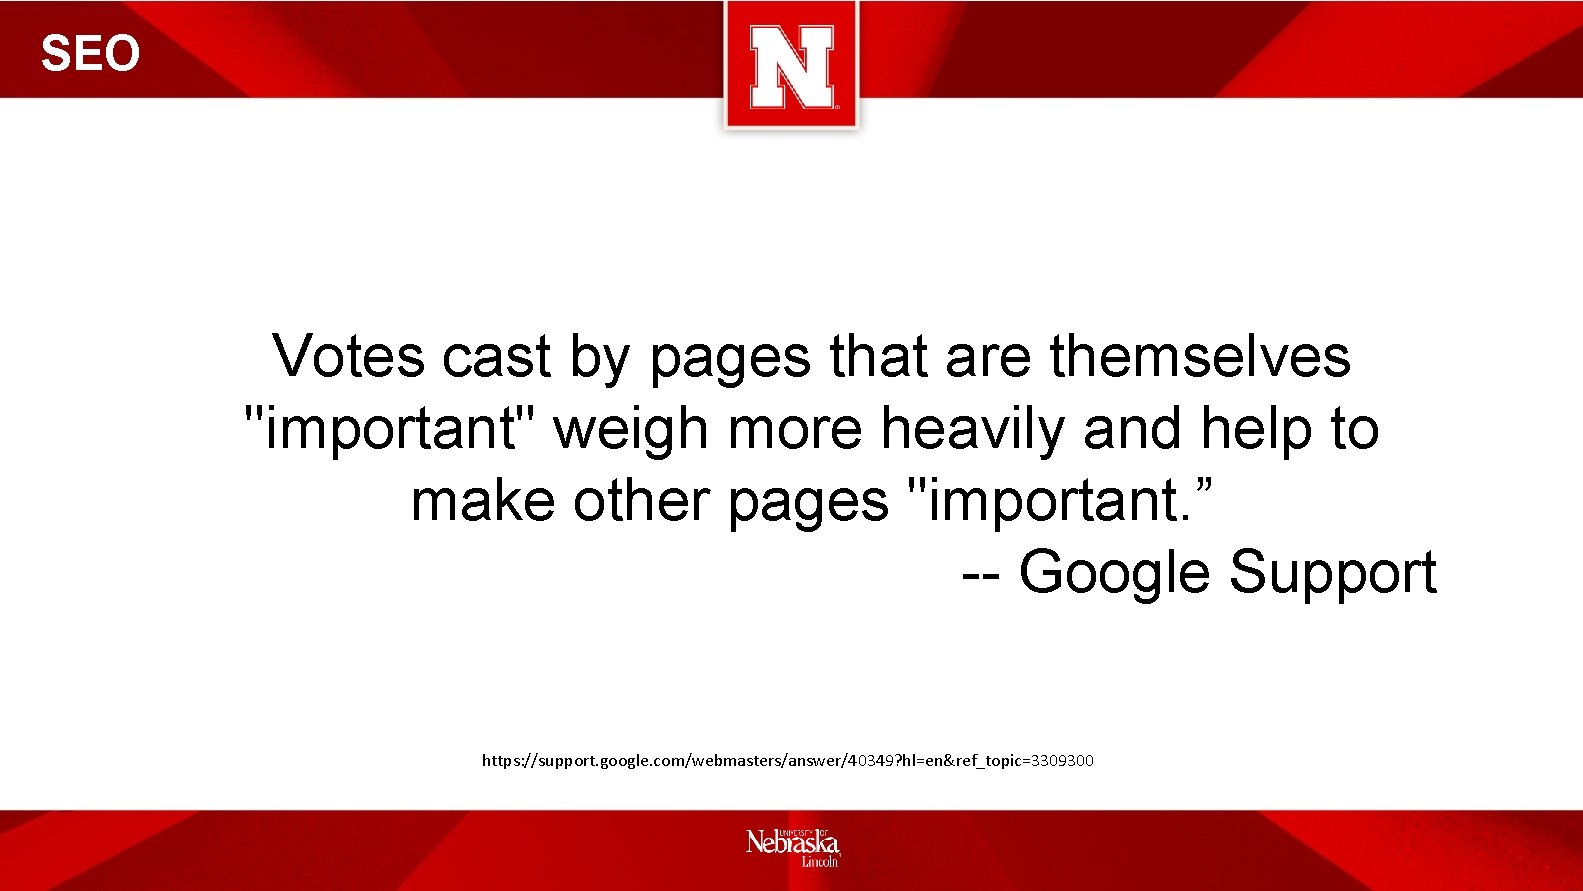 SEO Votes cast by pages that are themselves "important" weigh more heavily and help